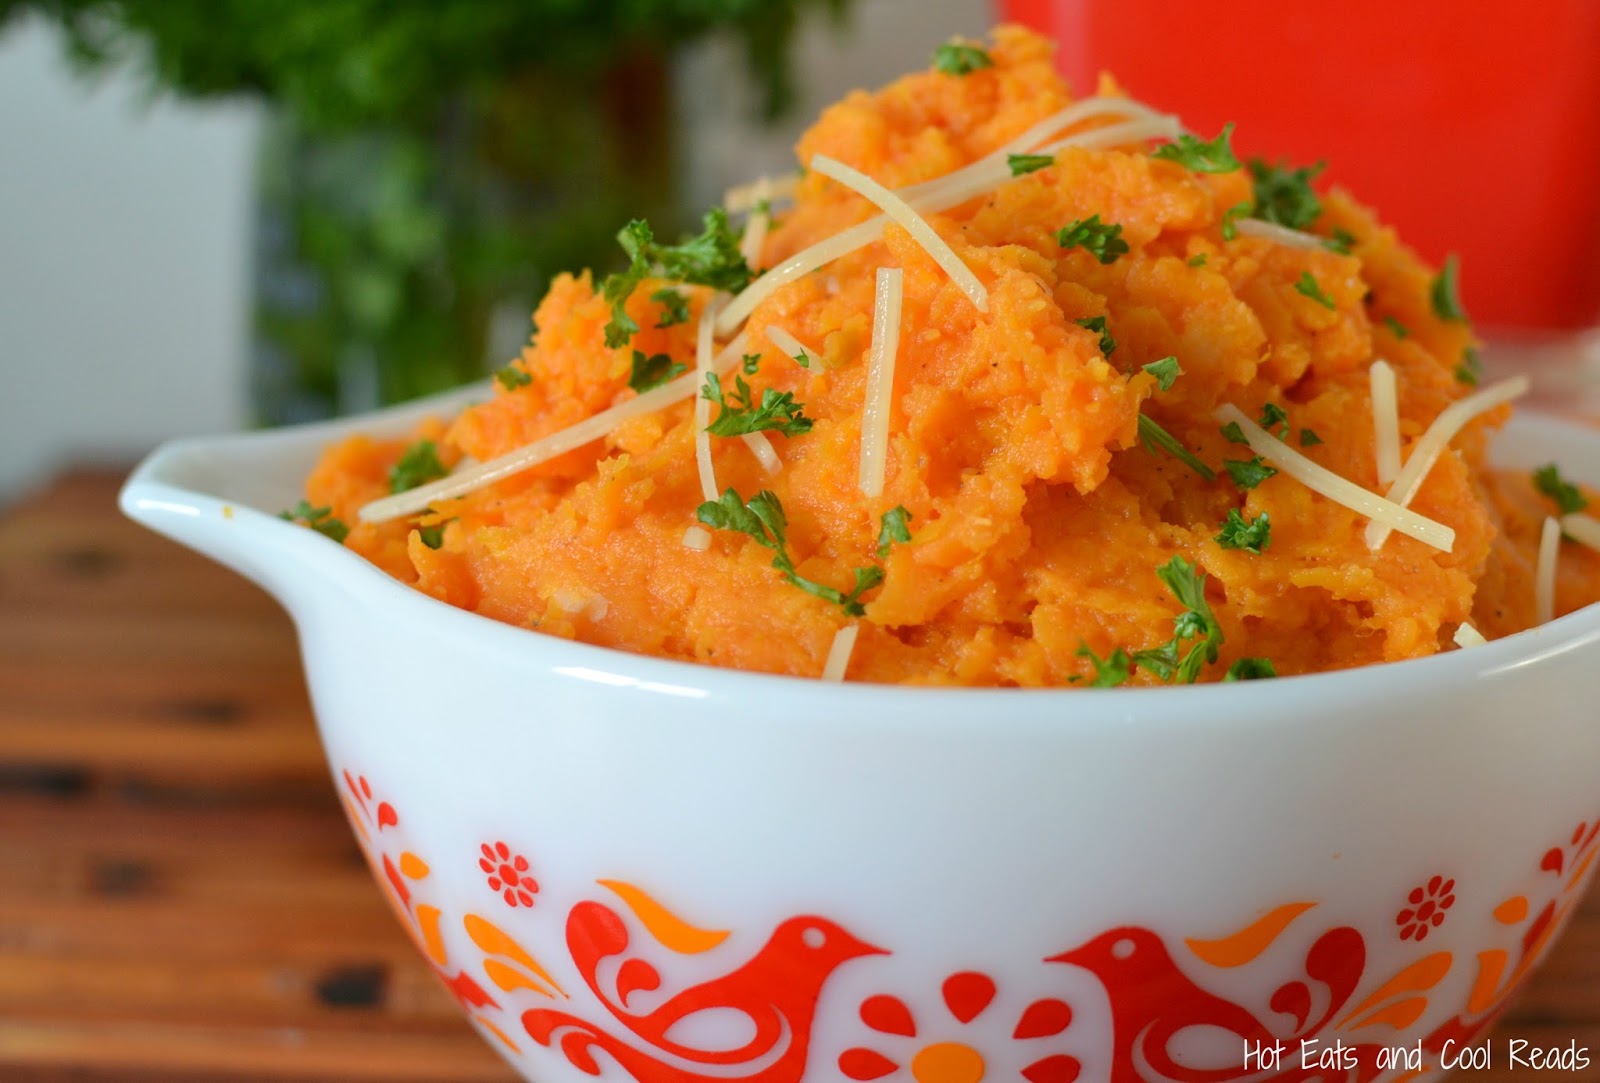 Zesty Parmesan Mashed Sweet Potatoes Recipe from Hot Eats and Cool Reads! These mashed sweet potatoes are a lovely fall treat! Make them for a side at dinner or something new for Thanksgiving!